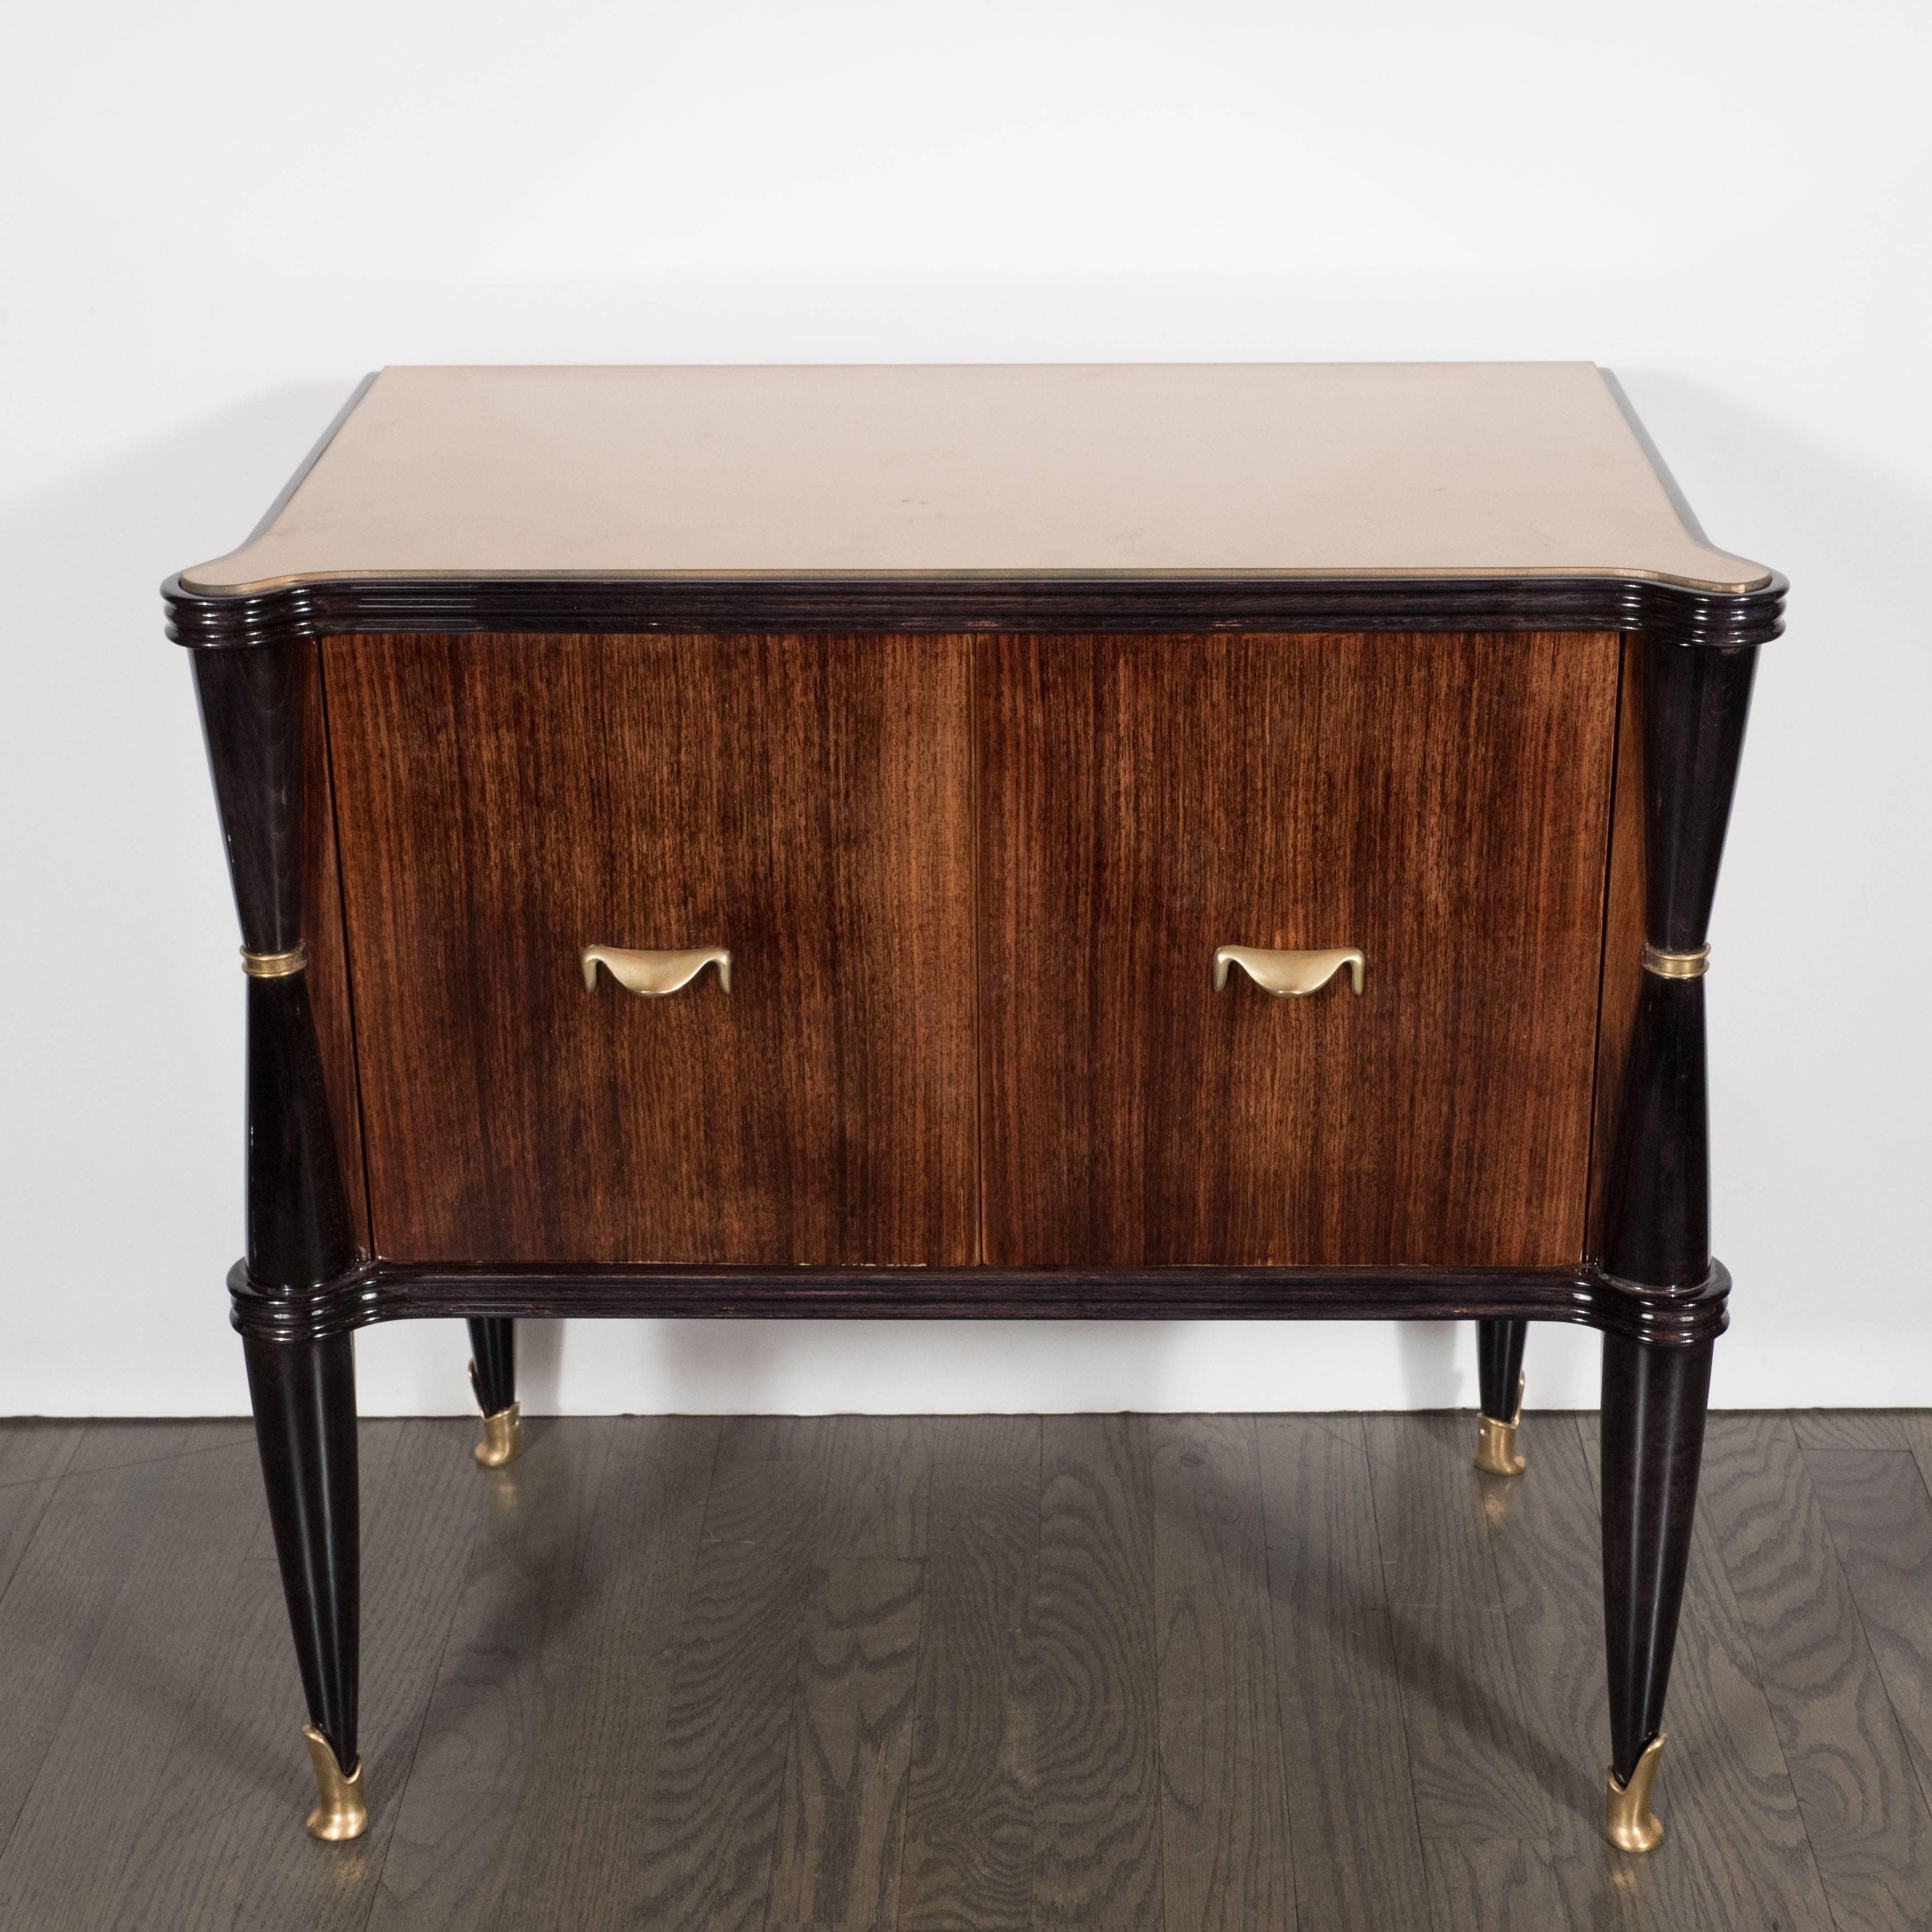 Italian Pair of Mid-Century Modernist Nightstands or End Tables in Rosewood and Gilt